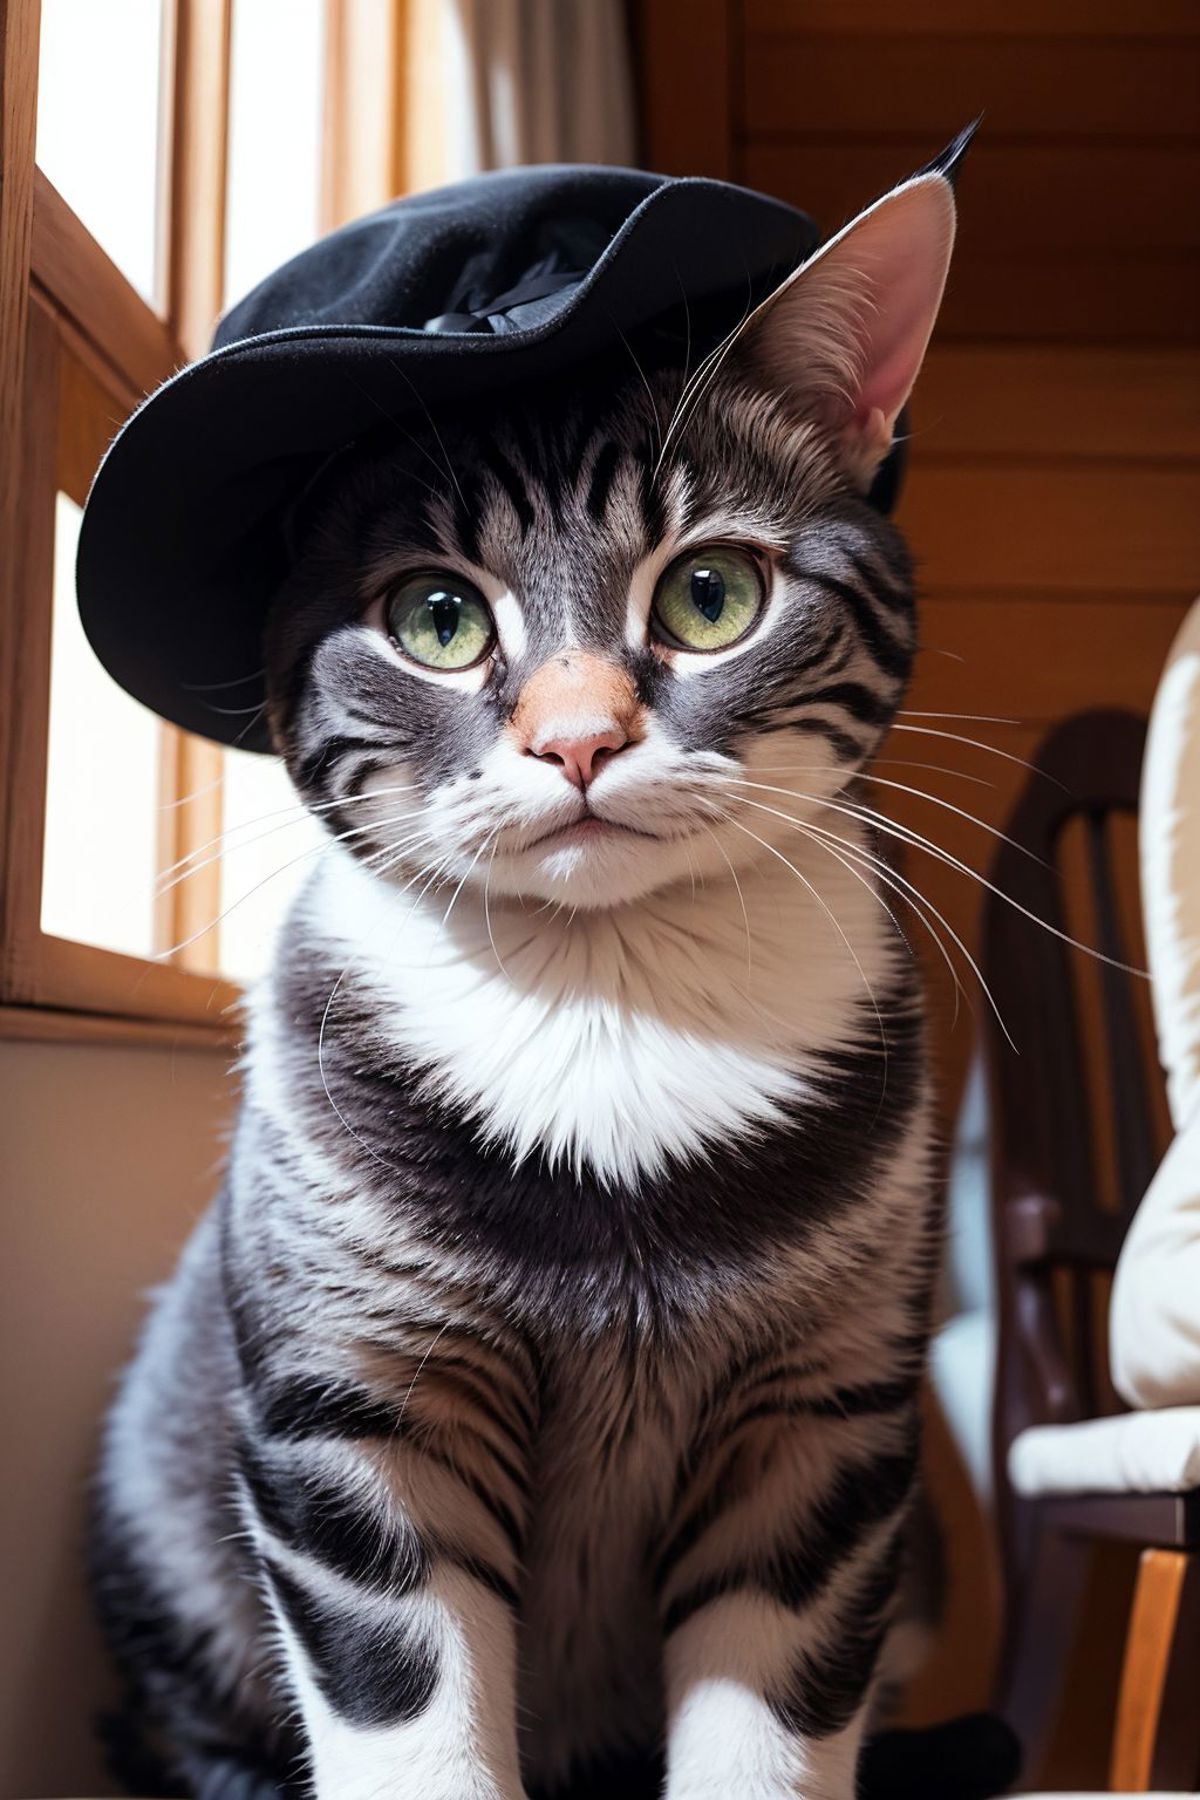 A gray and white cat with a black hat sitting in a chair.